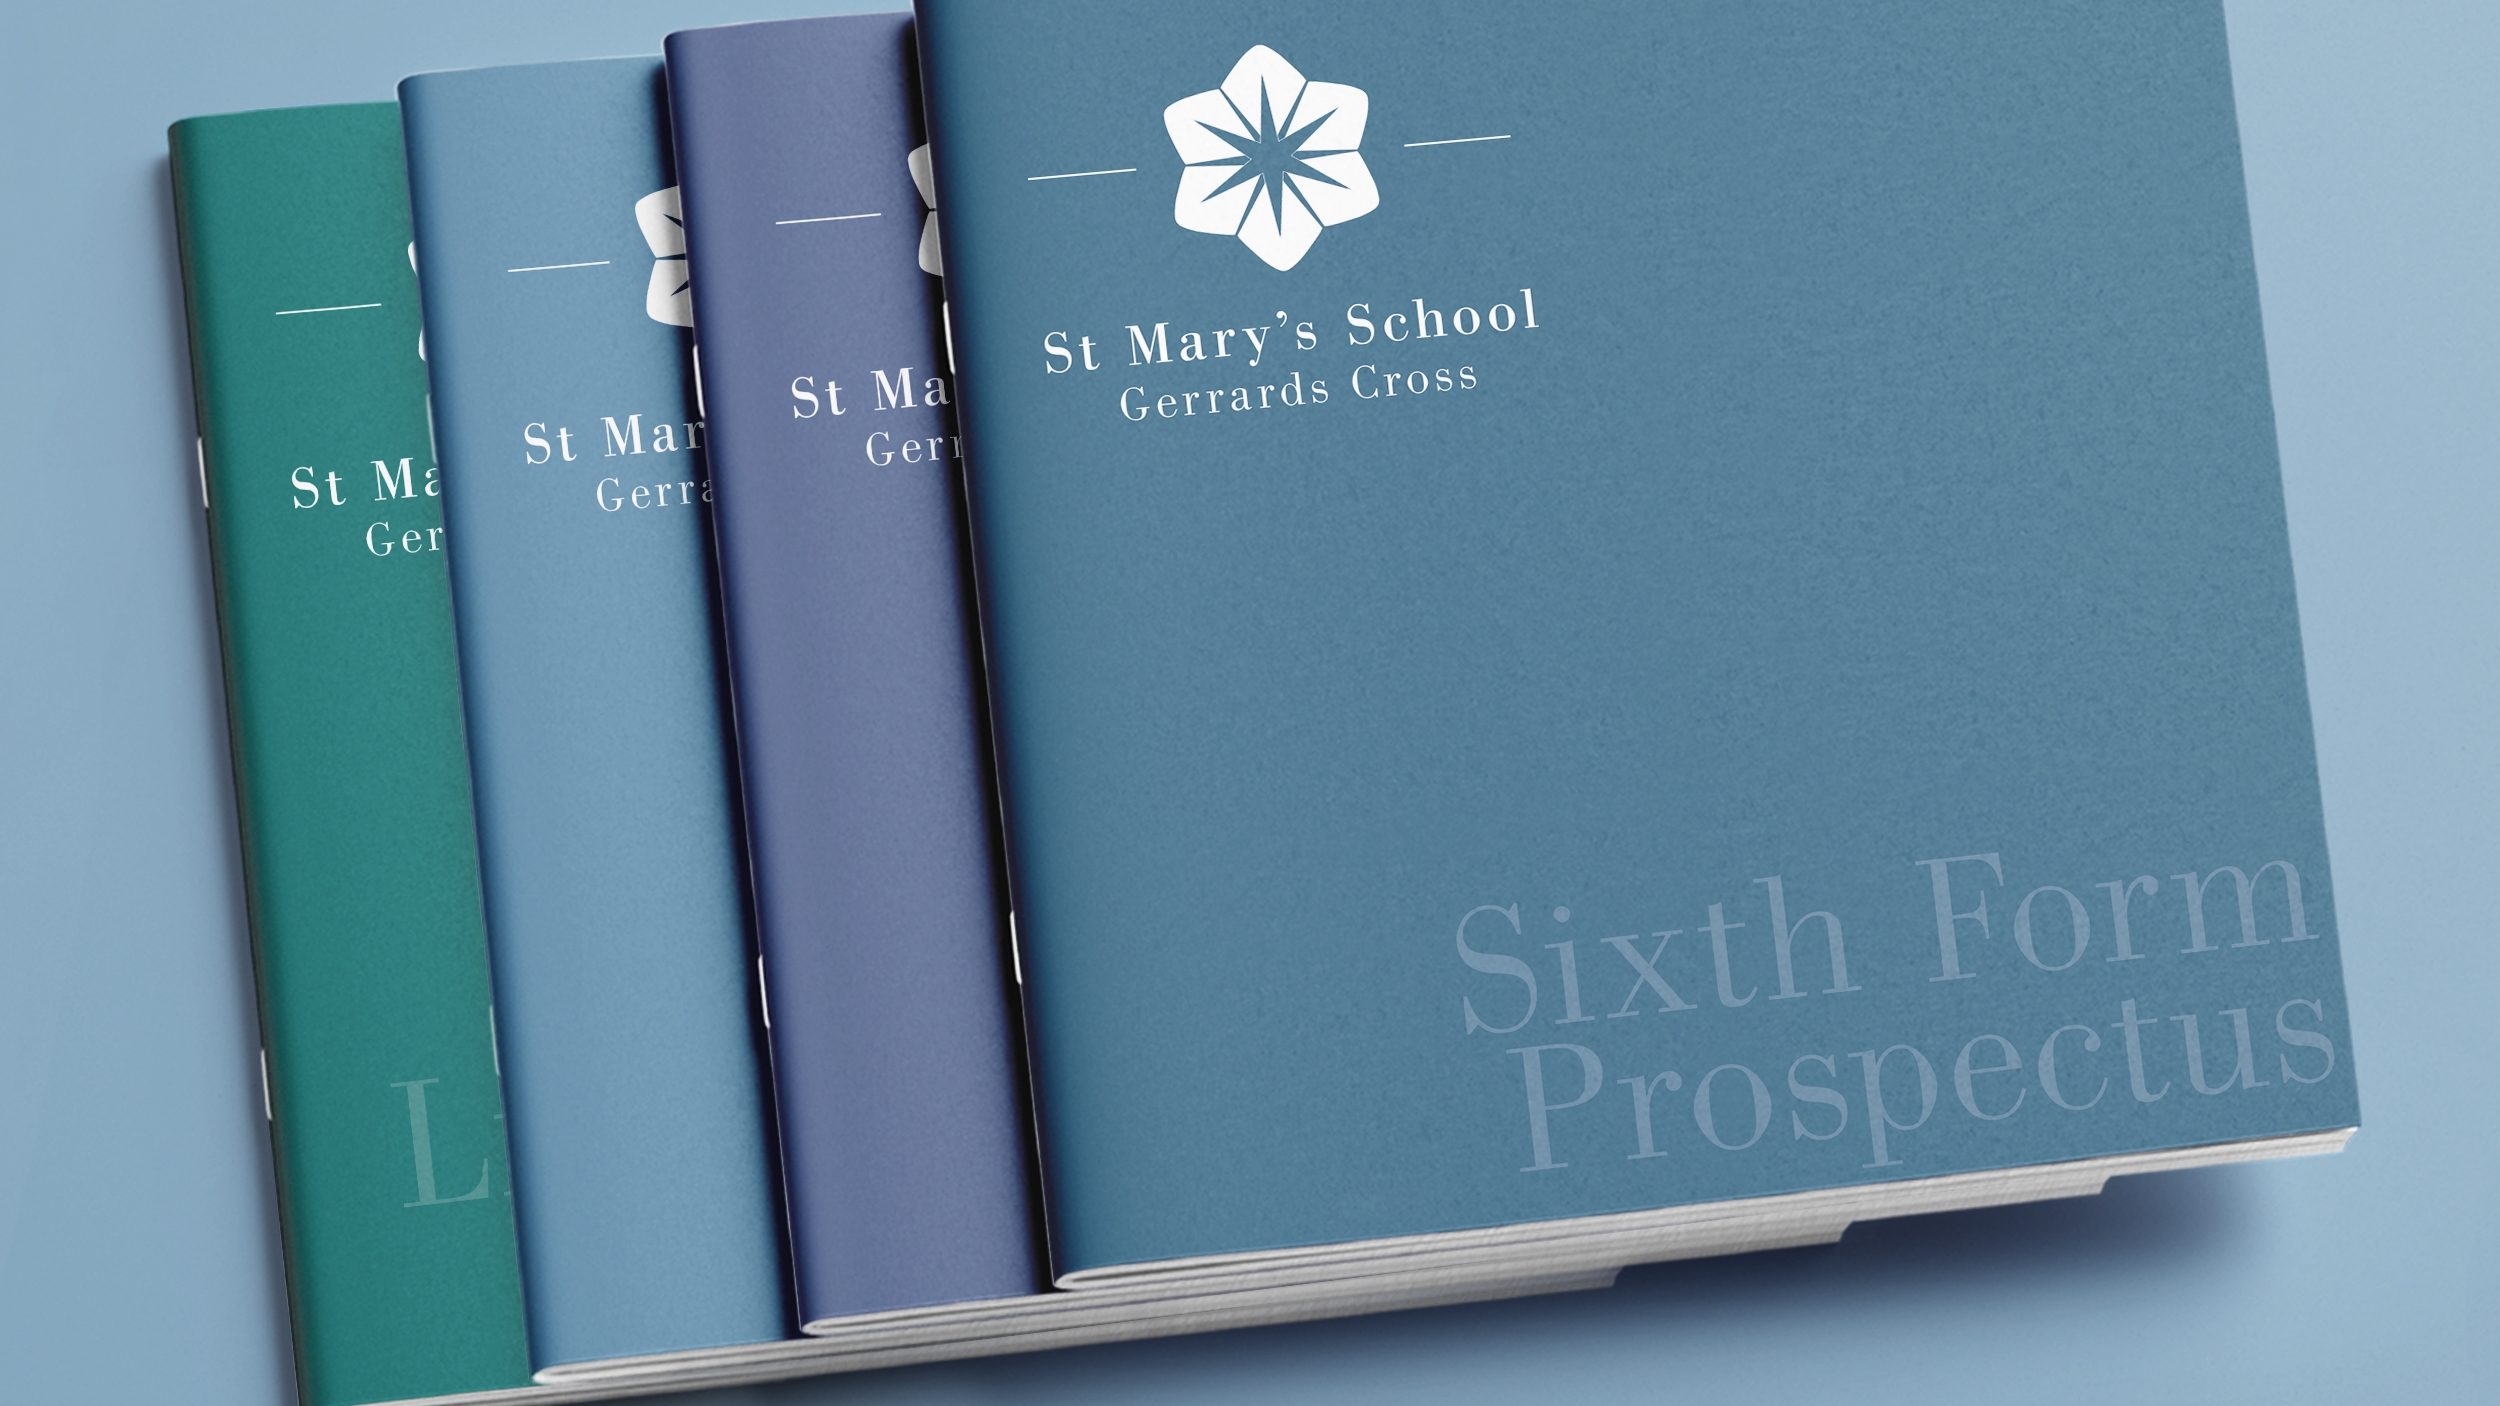 St Mary's projects